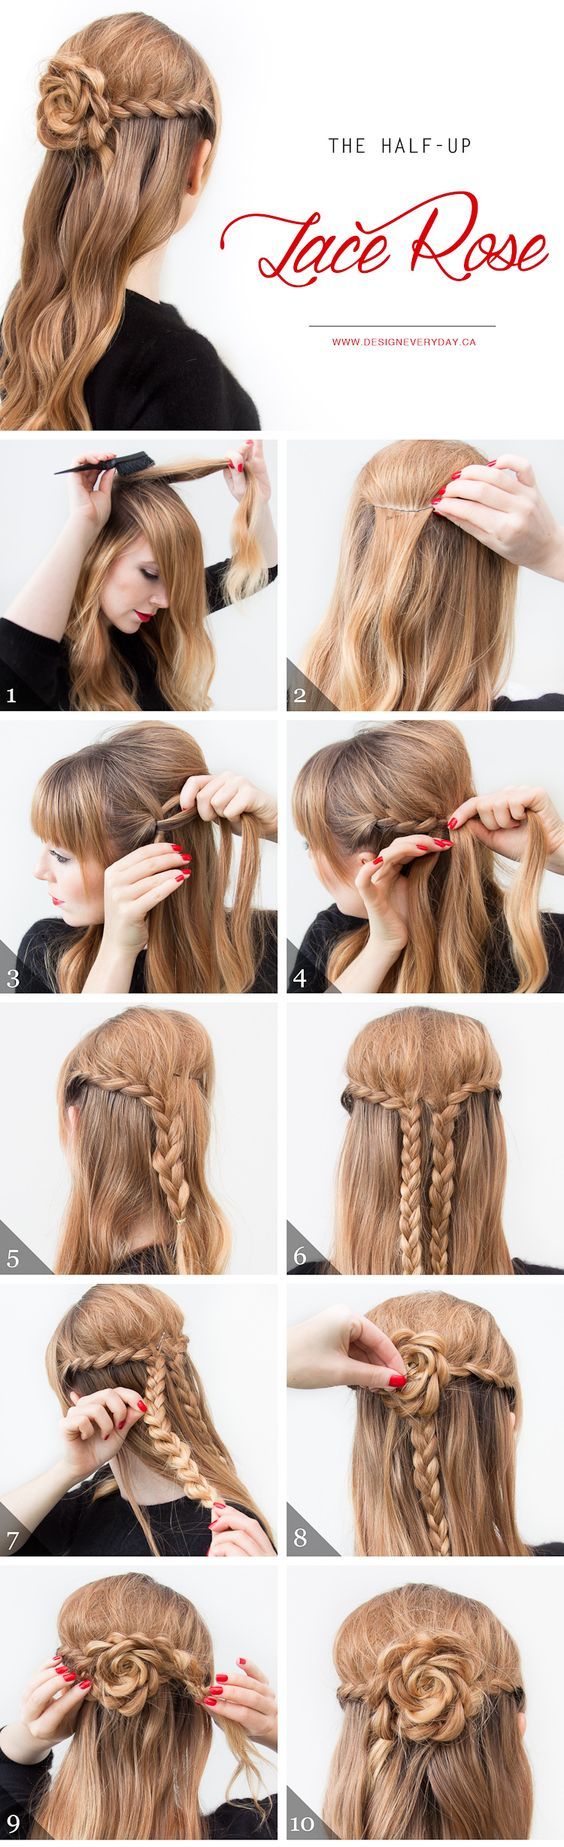 Girls Hairstyles Step by Step:Amazon.com:Appstore for Android